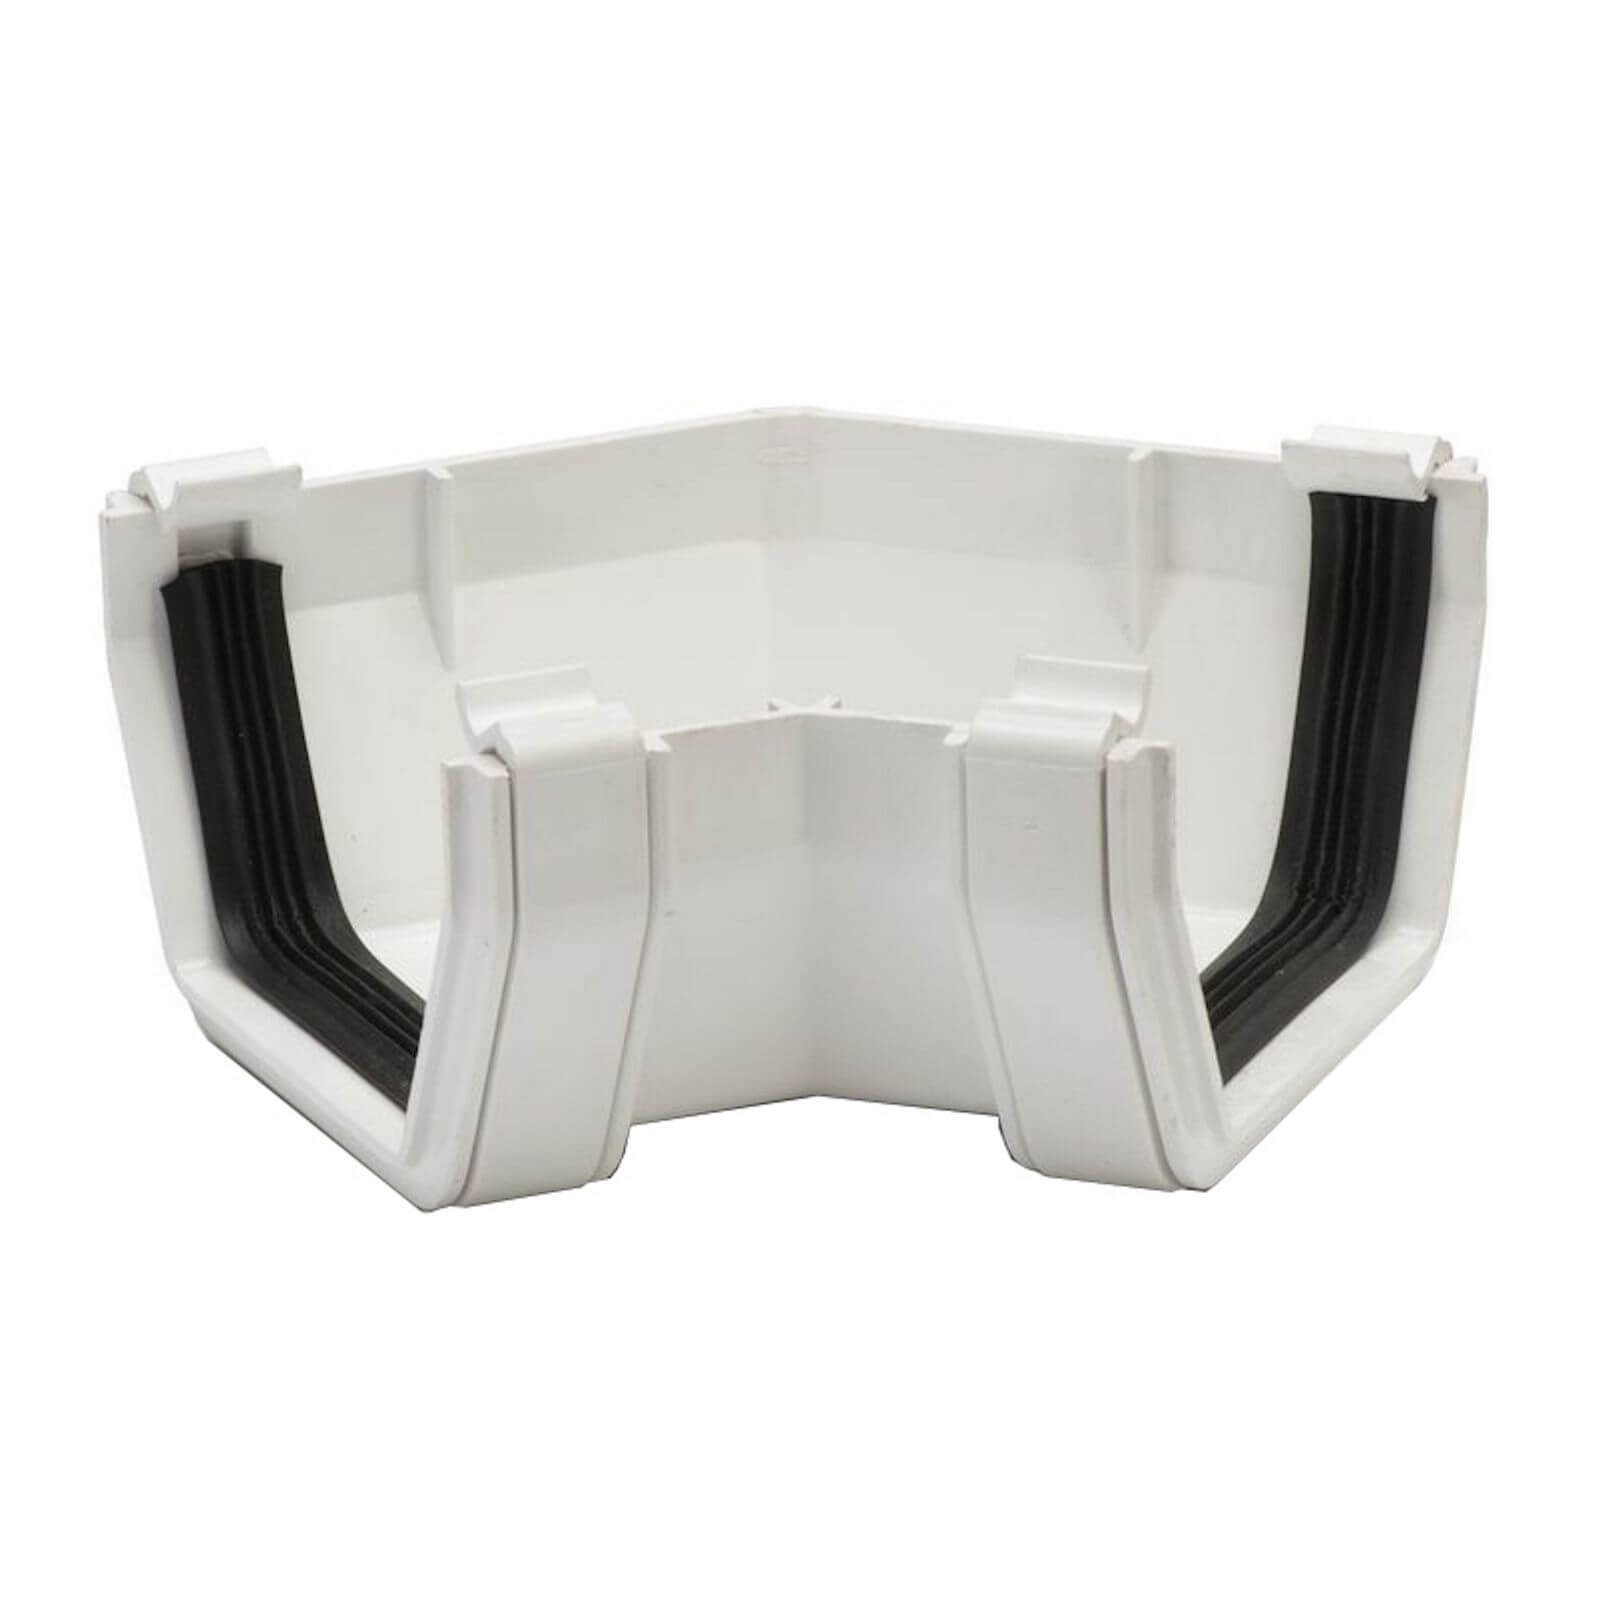 Photo of Polypipe Square Gutter Angle - 112mm X 135 Degree - White